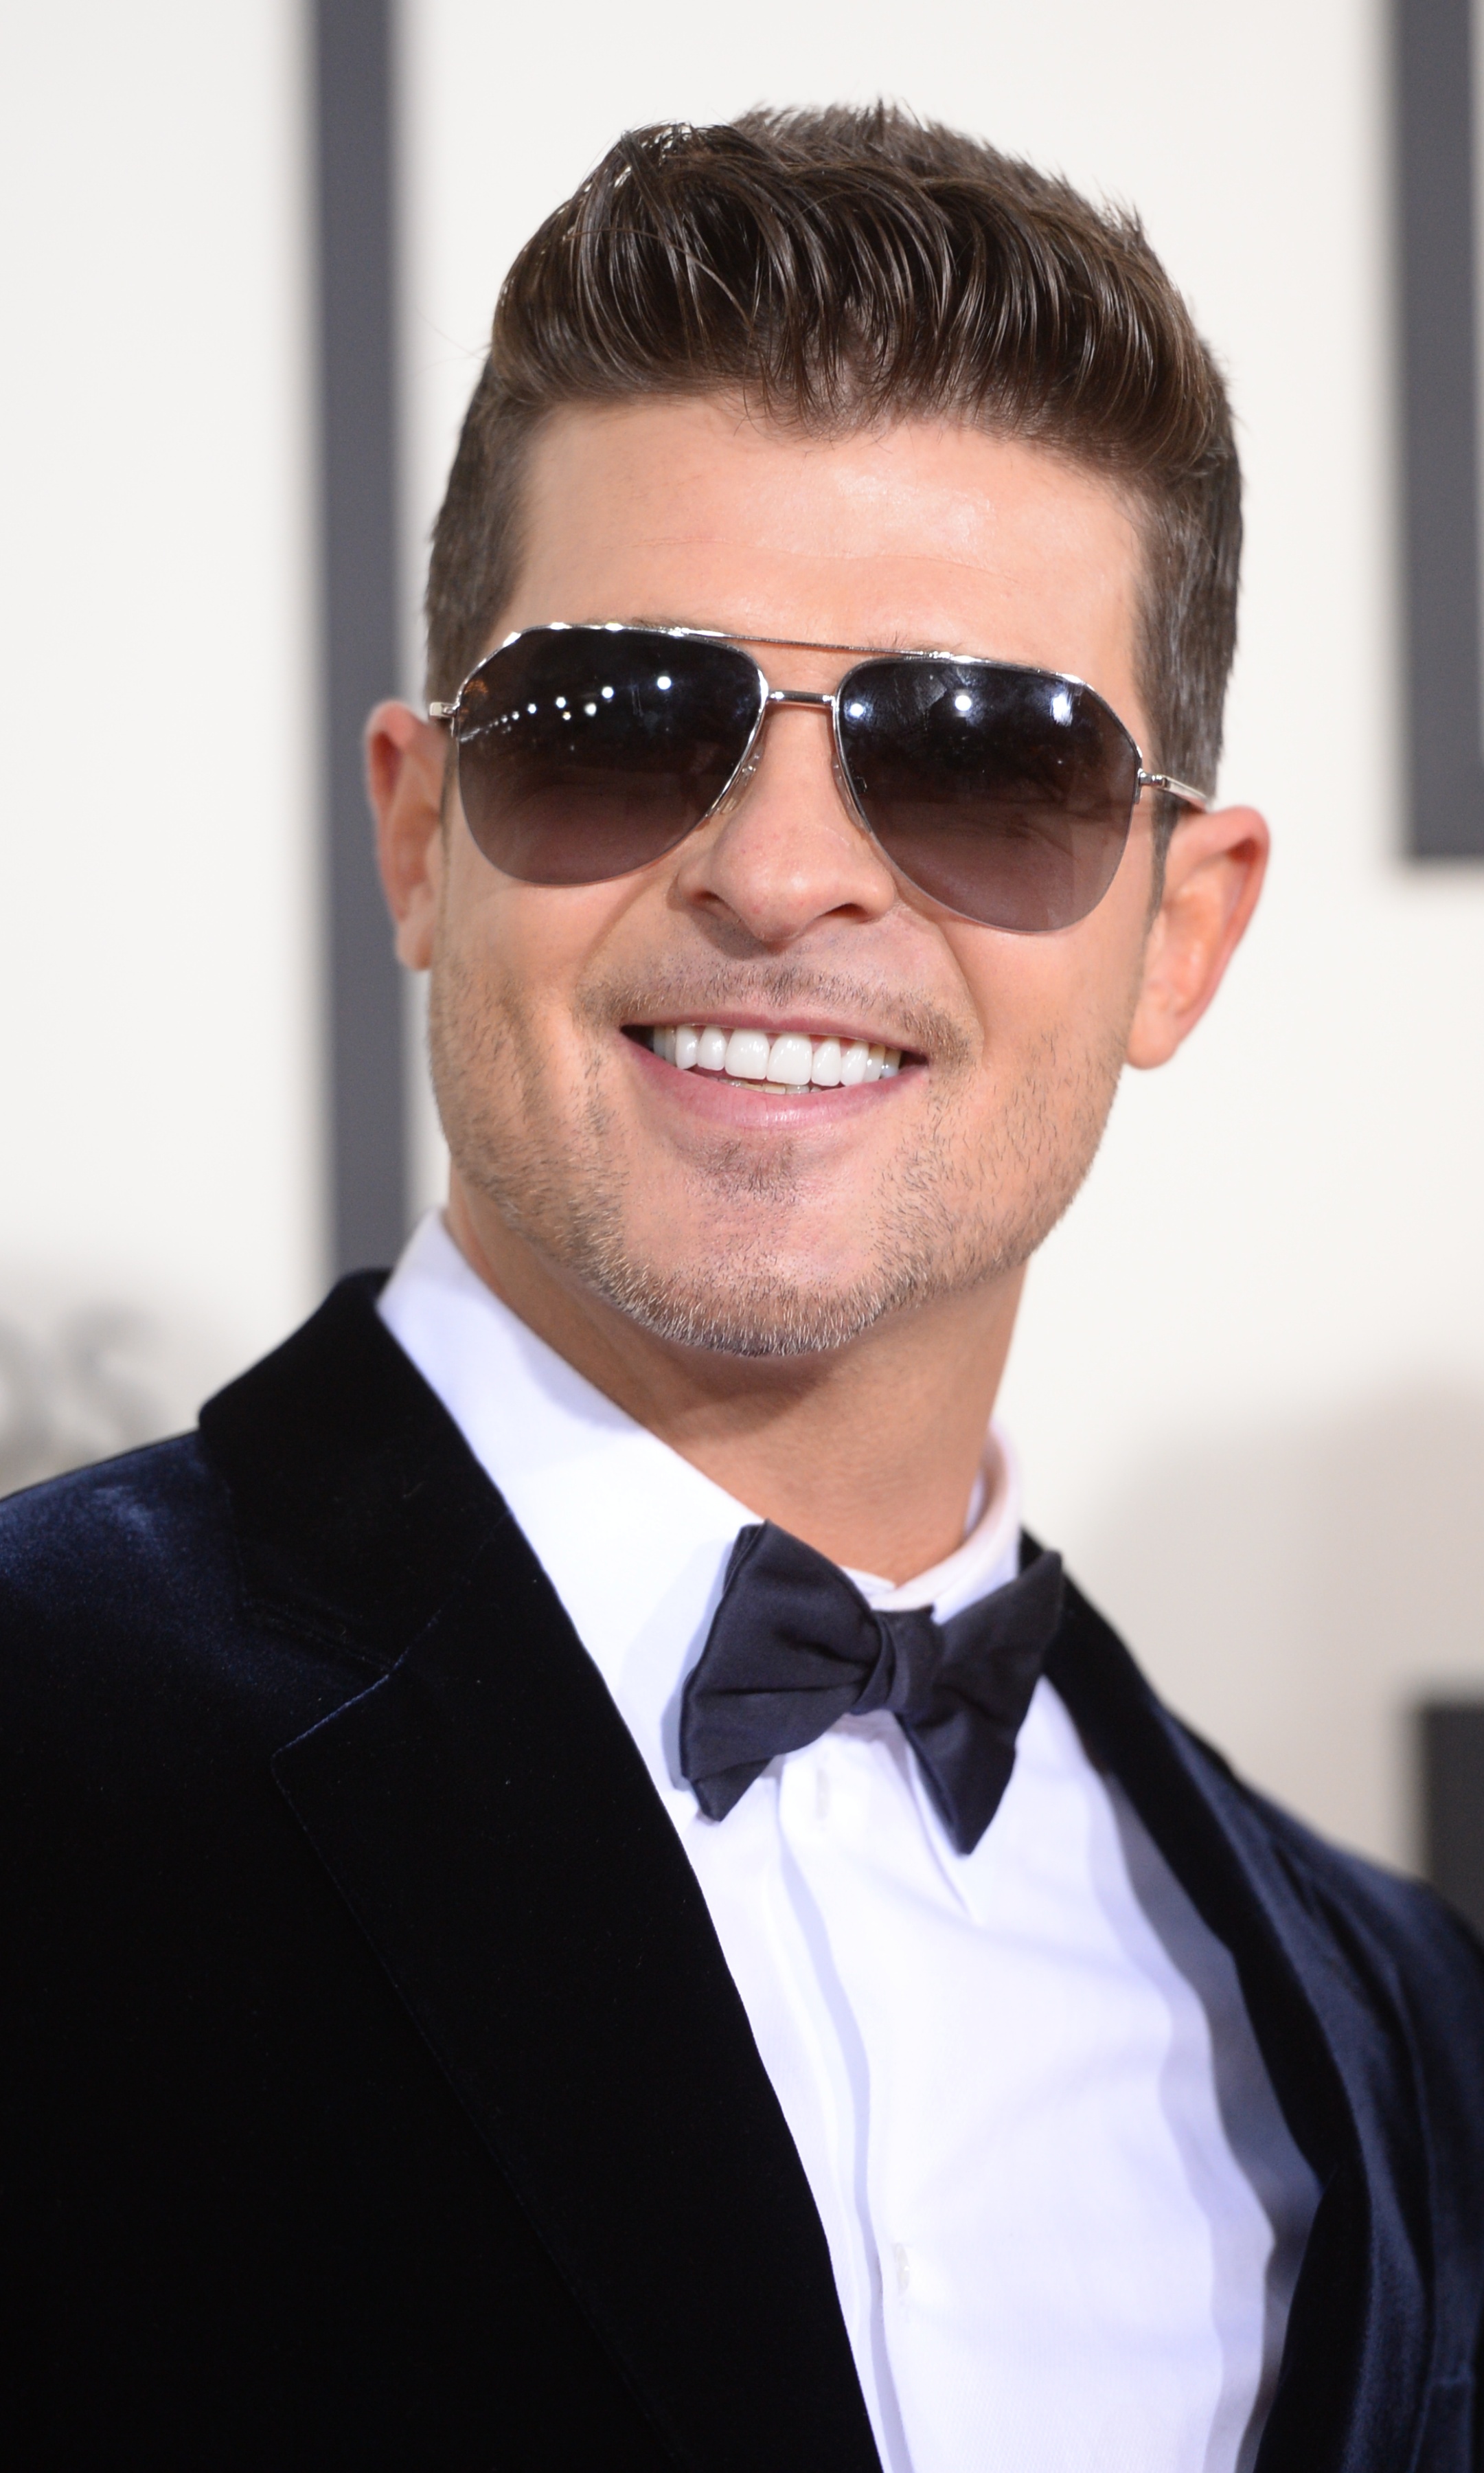 Robin Thicke arrives on the red carpet for the 56th Grammy Awards in Los Angeles on Jan. 26, 2014 (Robyn Beck—AFP/Getty Images)